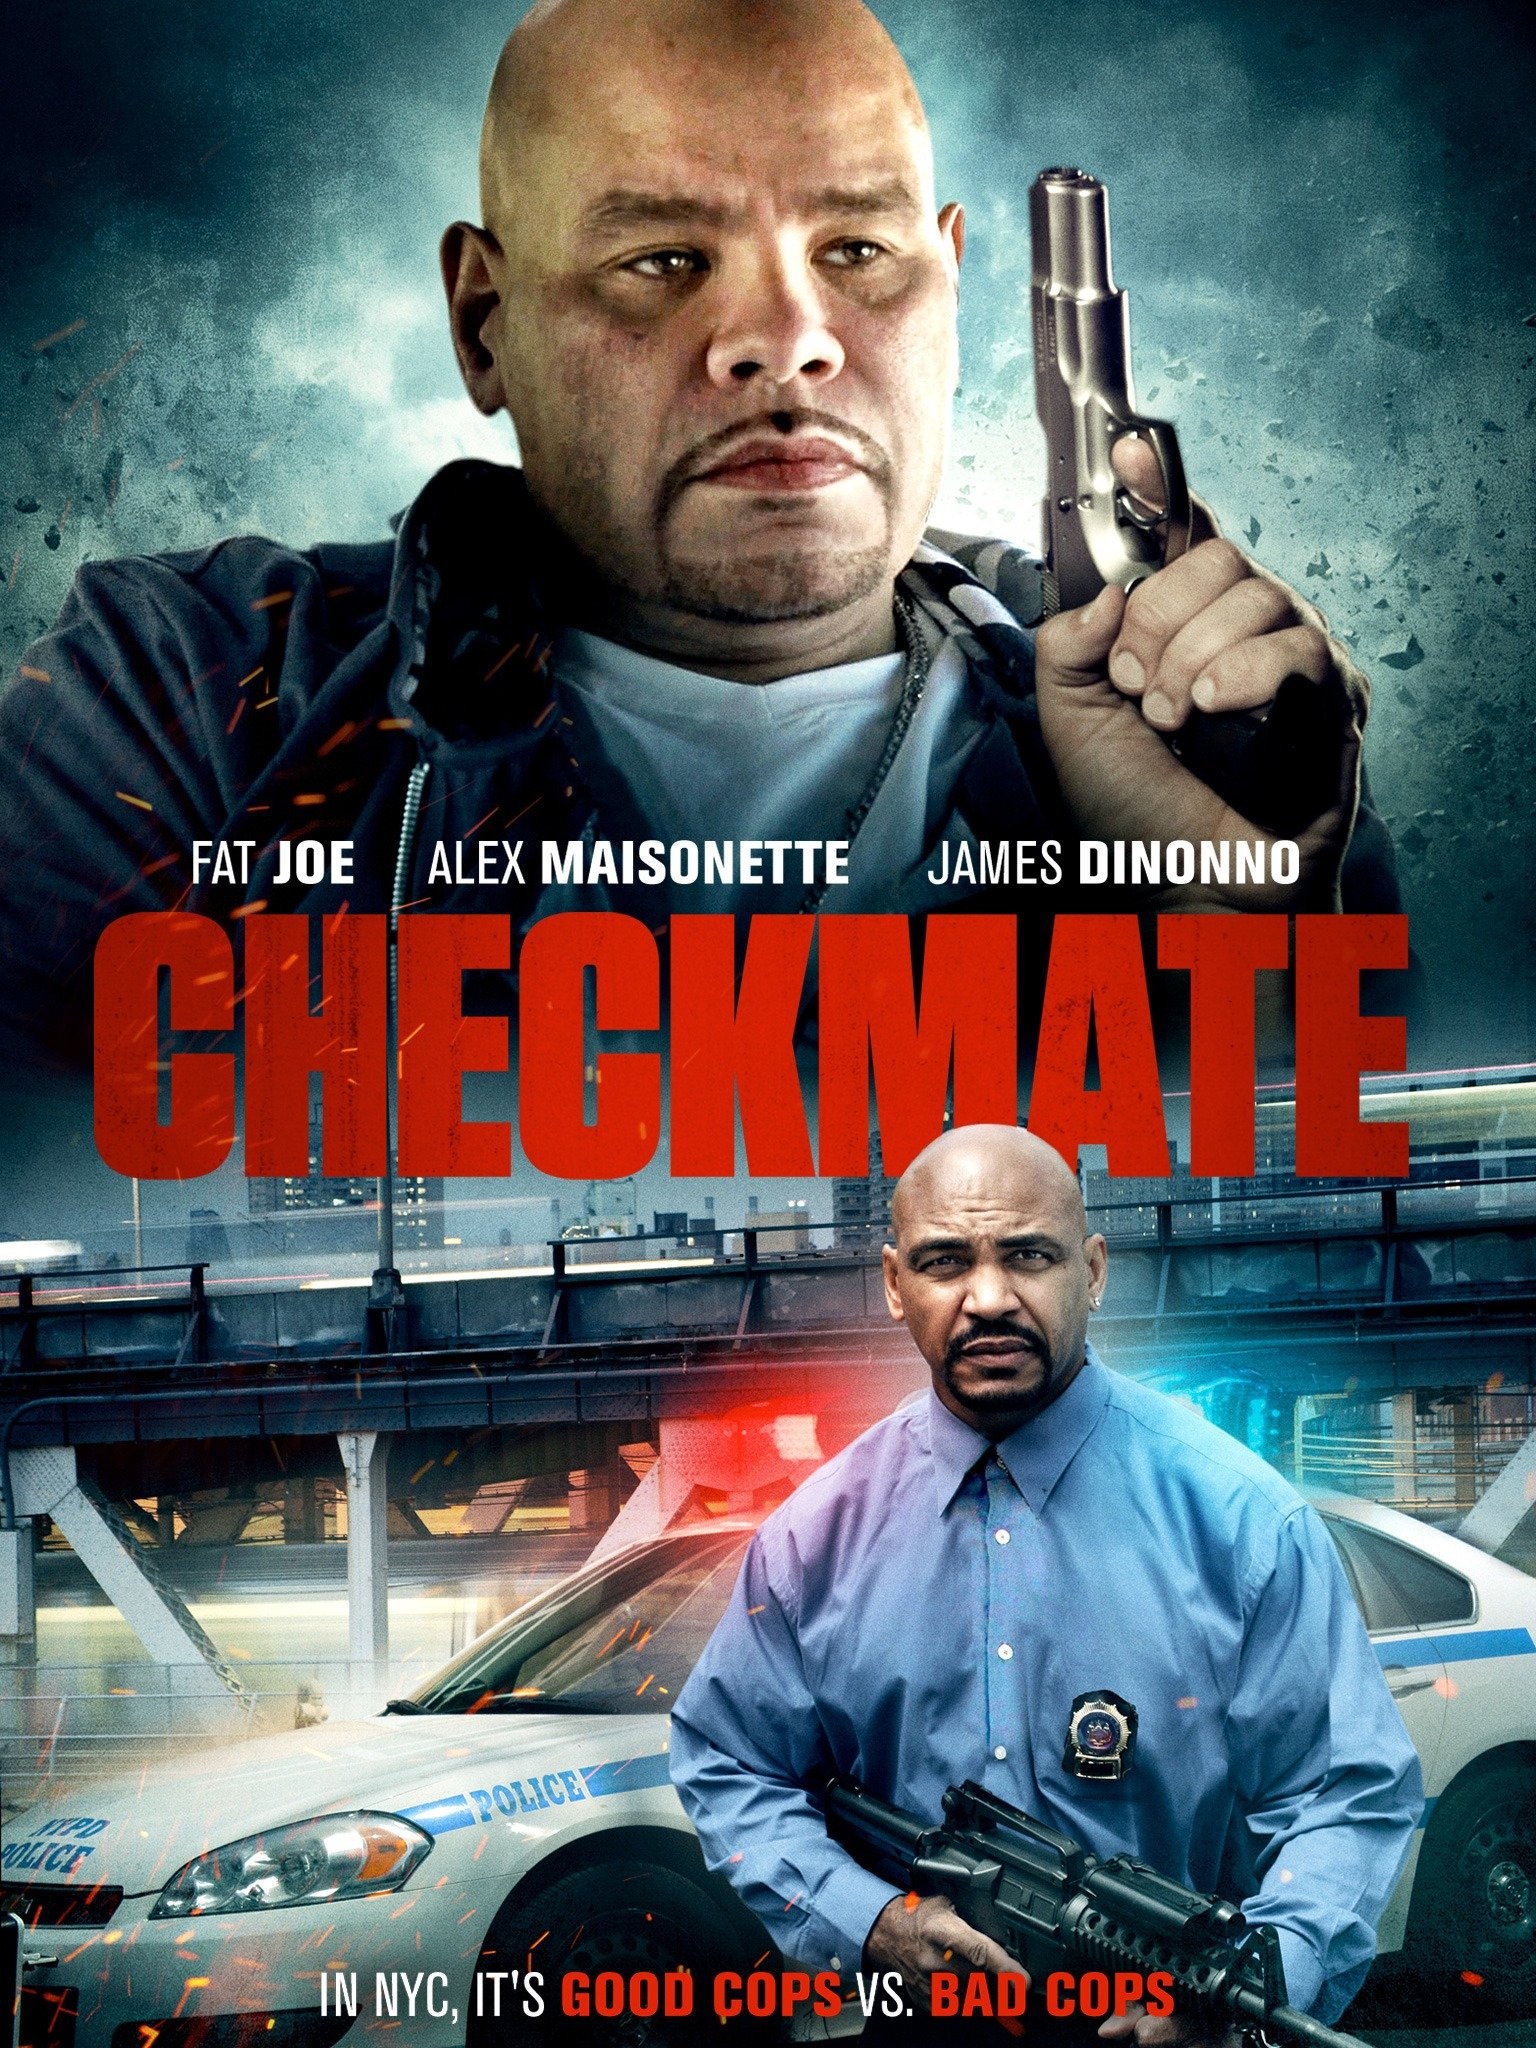 Watch Checkmate Streaming Online